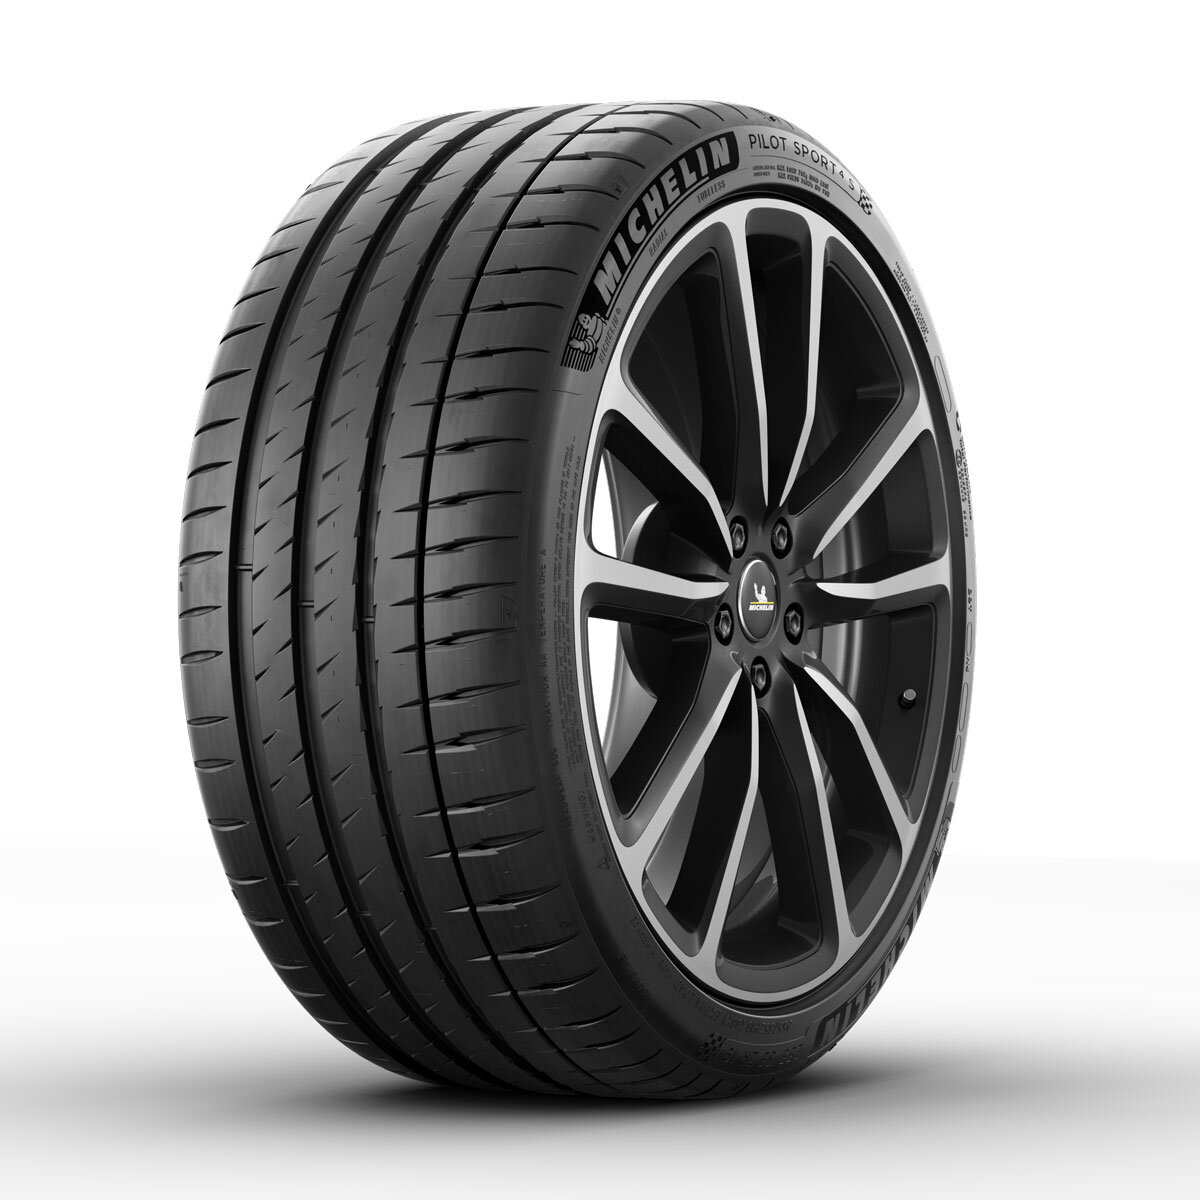 costco-any-set-of-4-michelin-tires-with-installation-deals